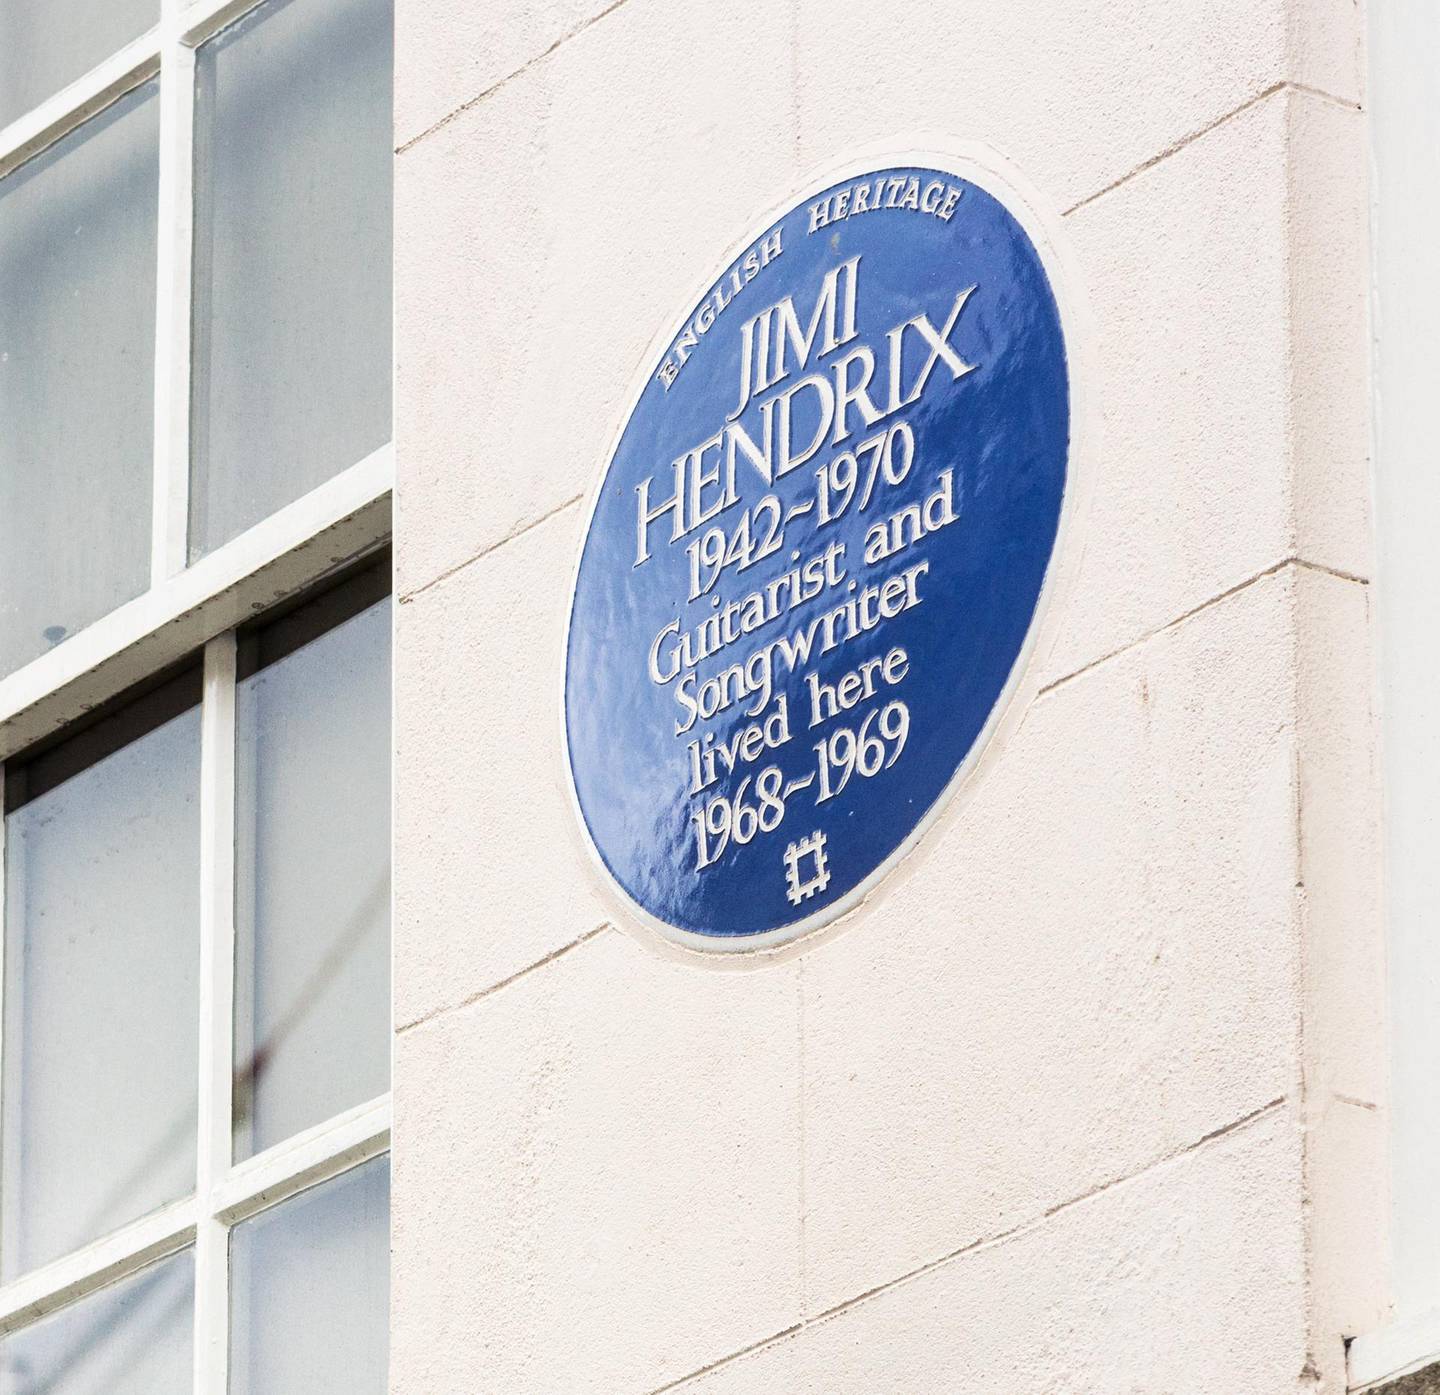 London, UK - An English Heritage blue plaque, marking the house in Mayfair, central London, where the musician Jimi Hendrix lived in the late 1960s.